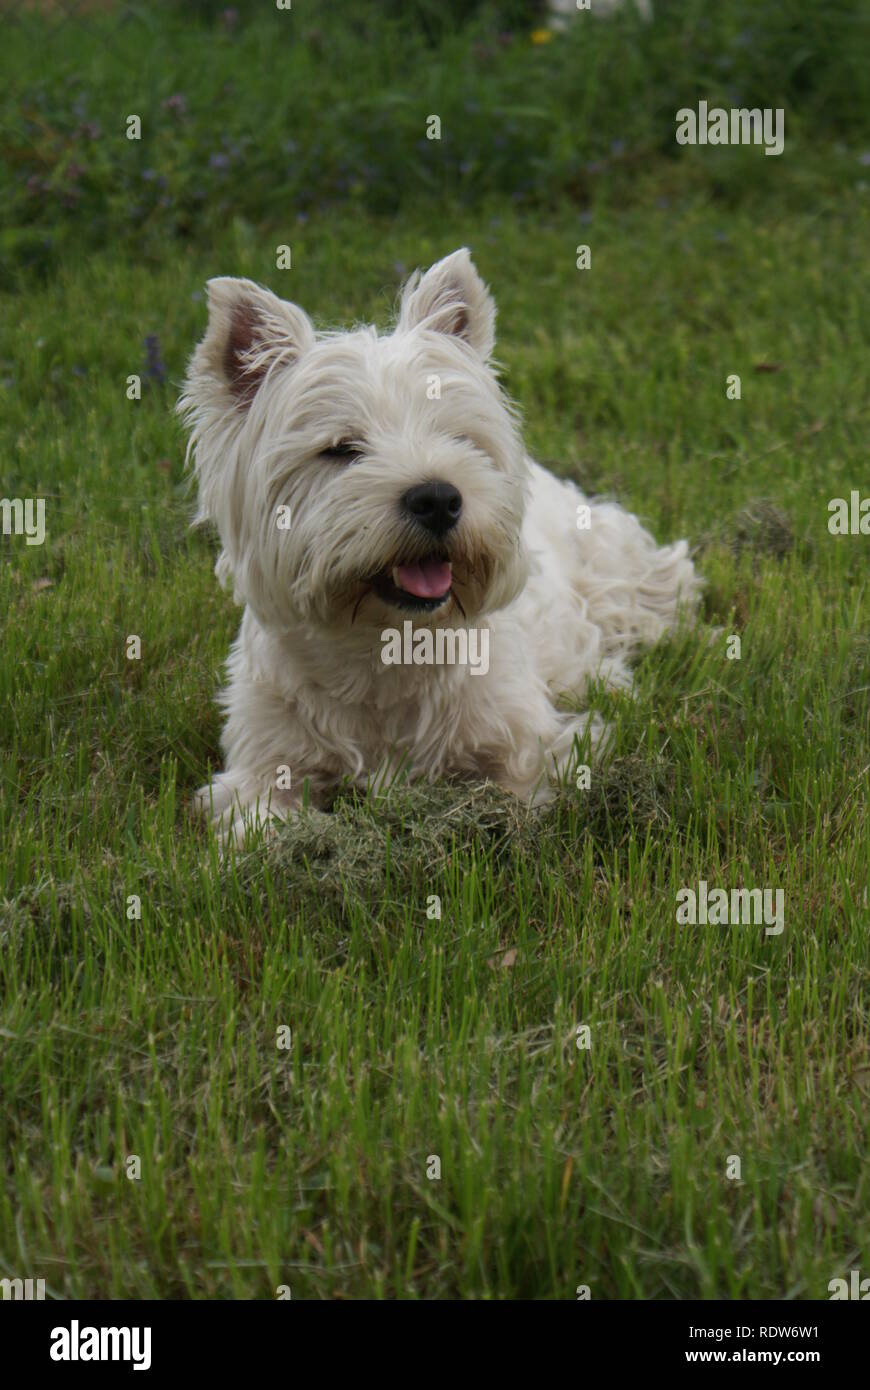 West highland white terrier in the grass sticking tounge out Stock Photo